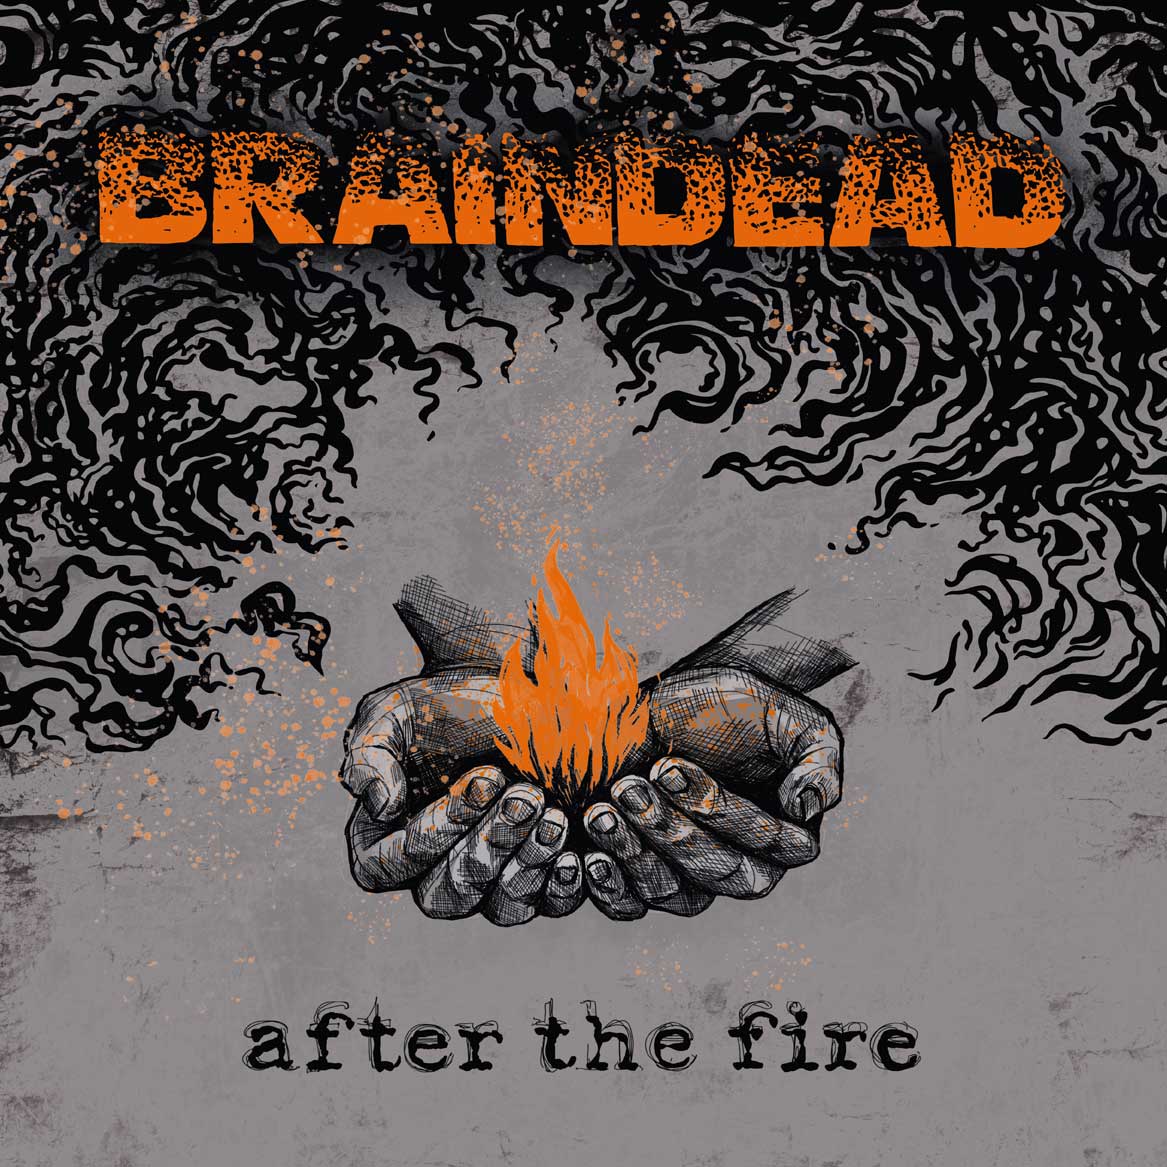 BRAINDEAD "After the fire" - 33T